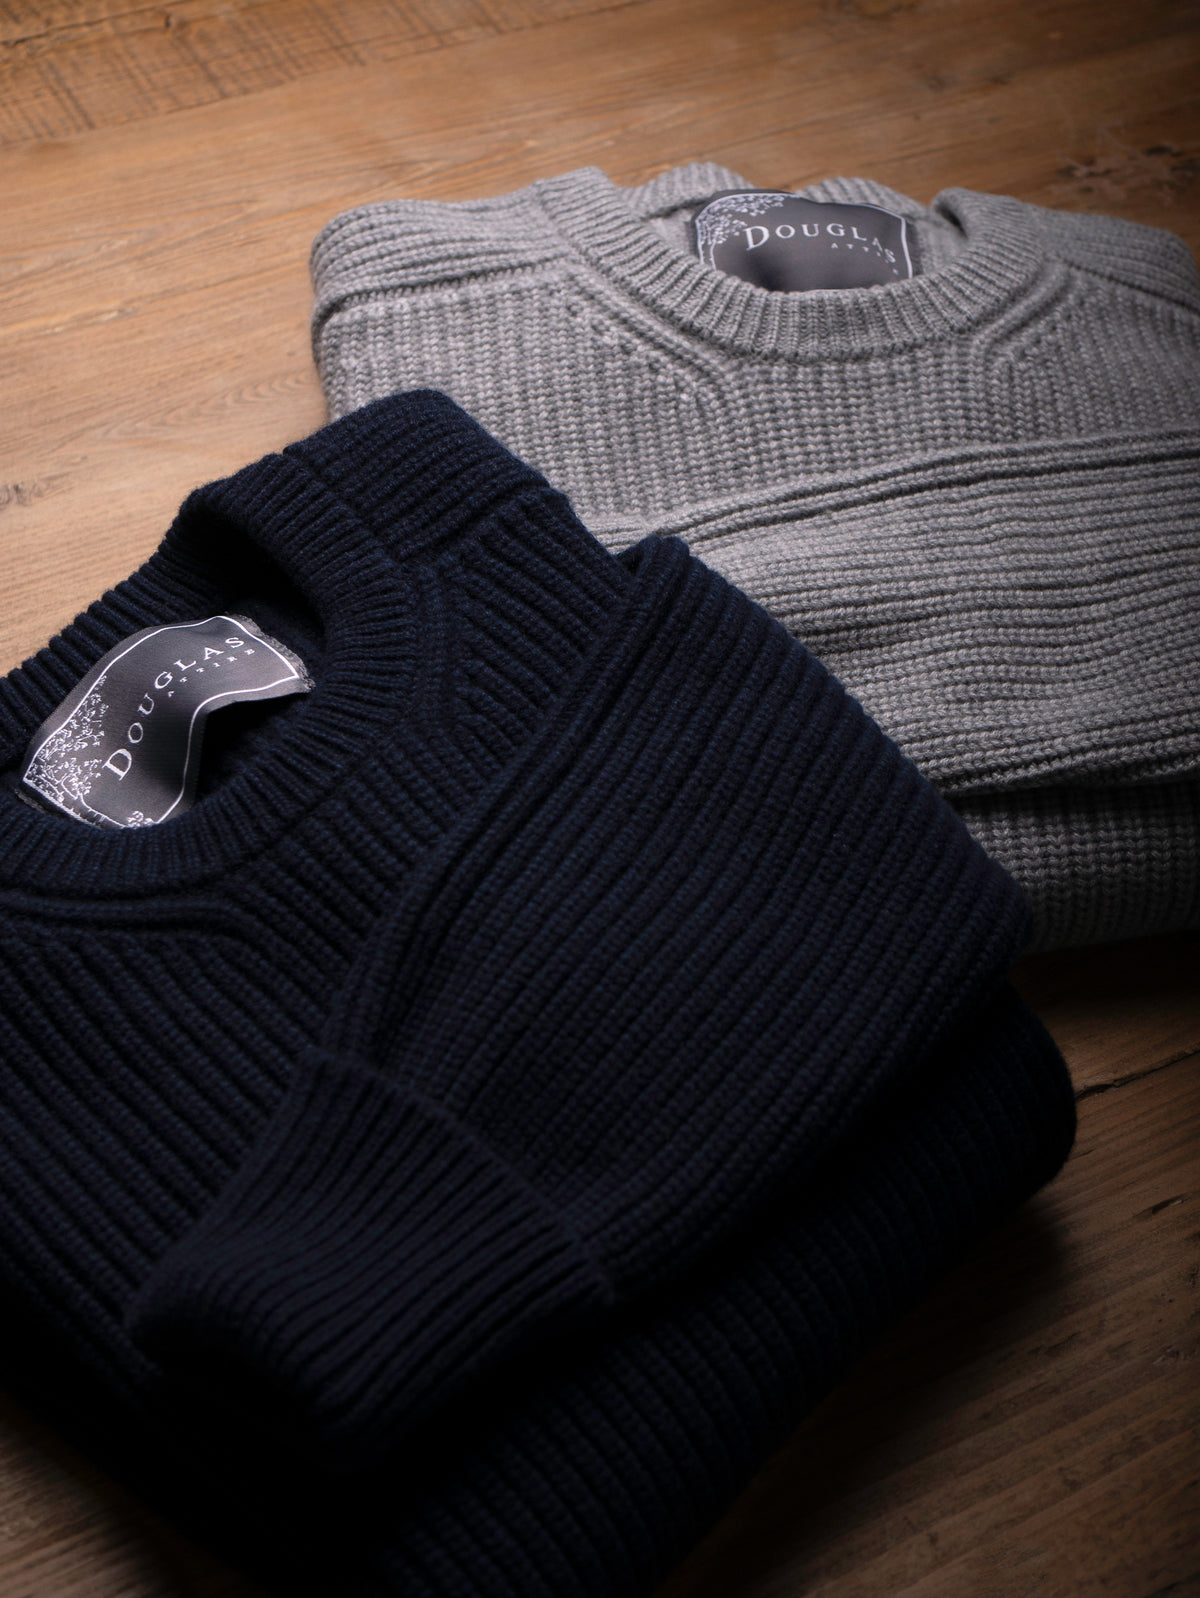 RIBBED SWEATER&lt;br&gt;NAVY